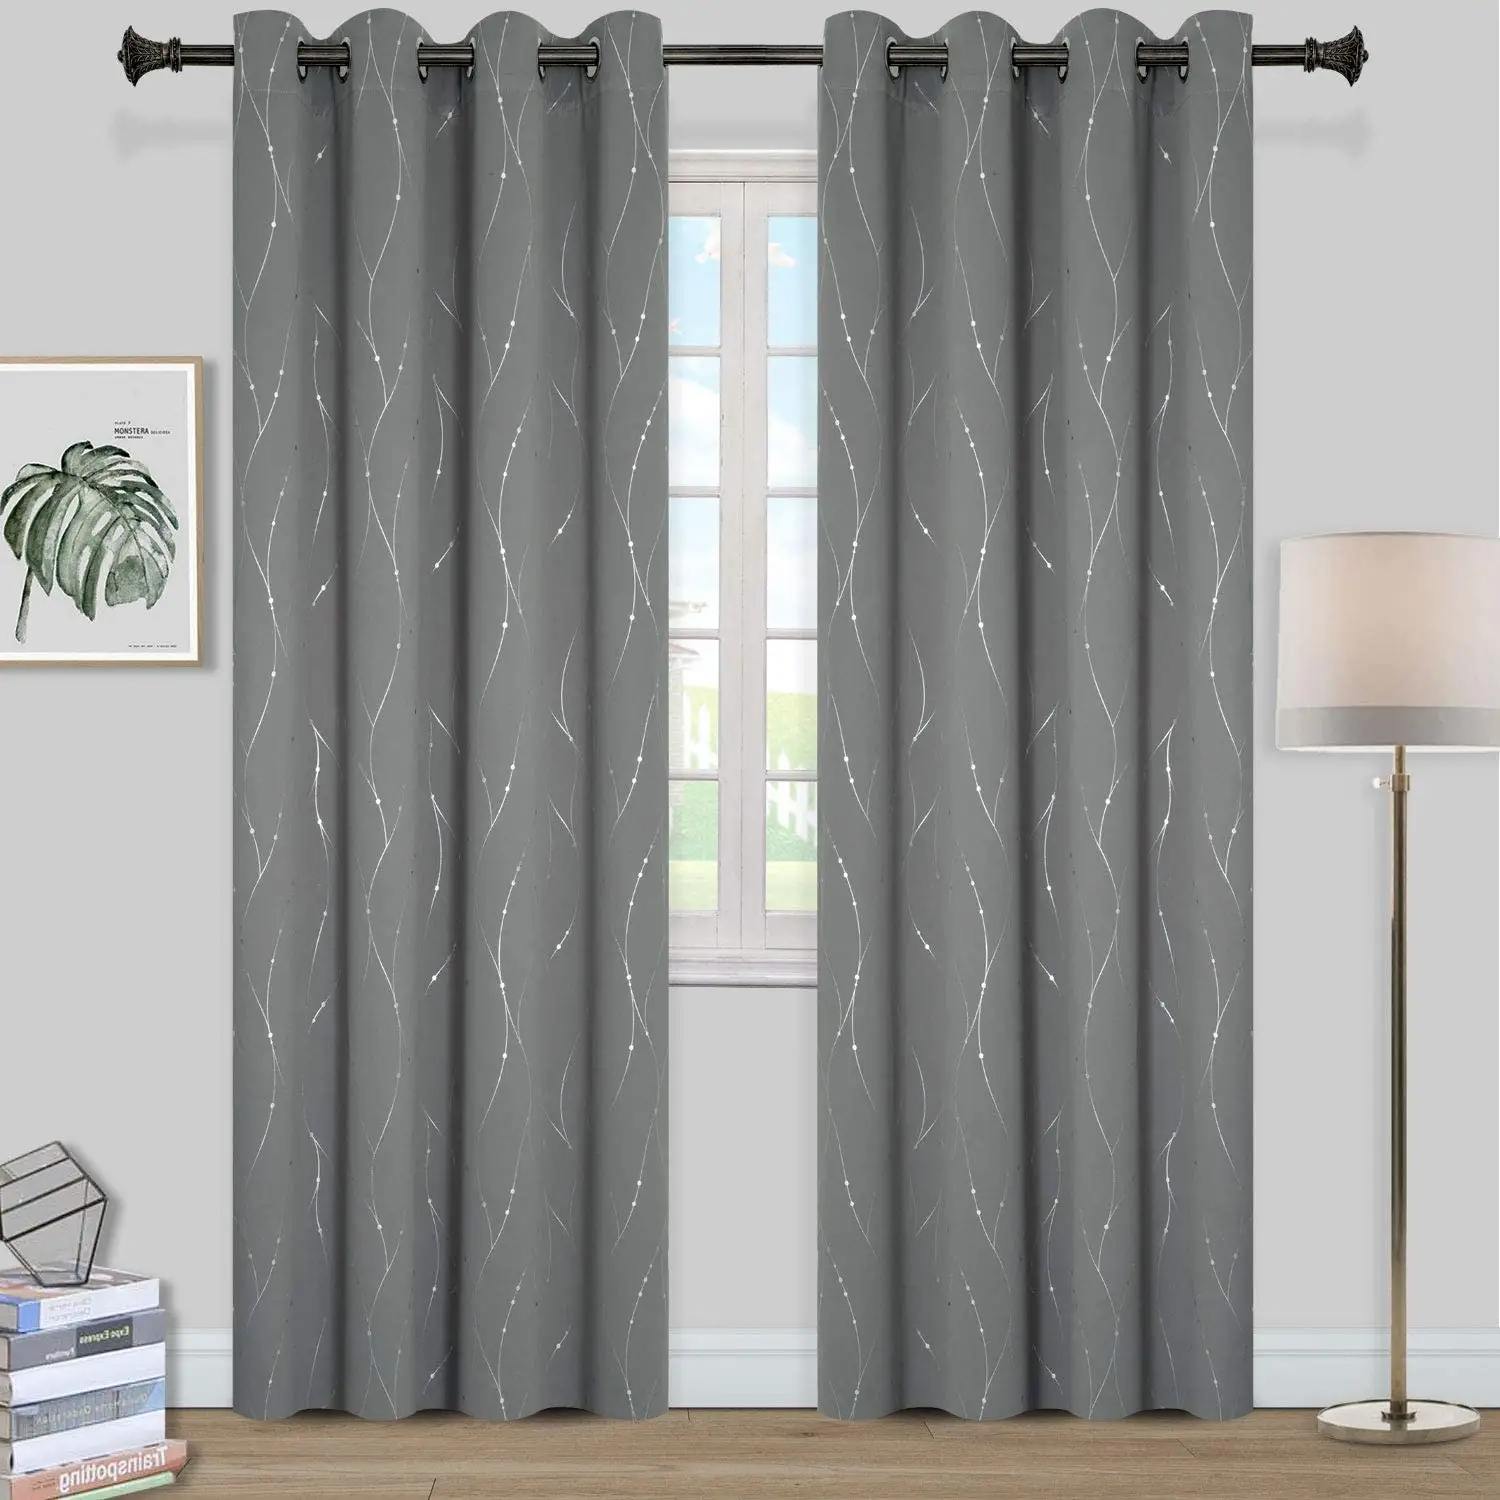 Grommet Top Blackout luxury Curtains Thermal Insulated Window Curtains with Wave Line and Dots Pattern